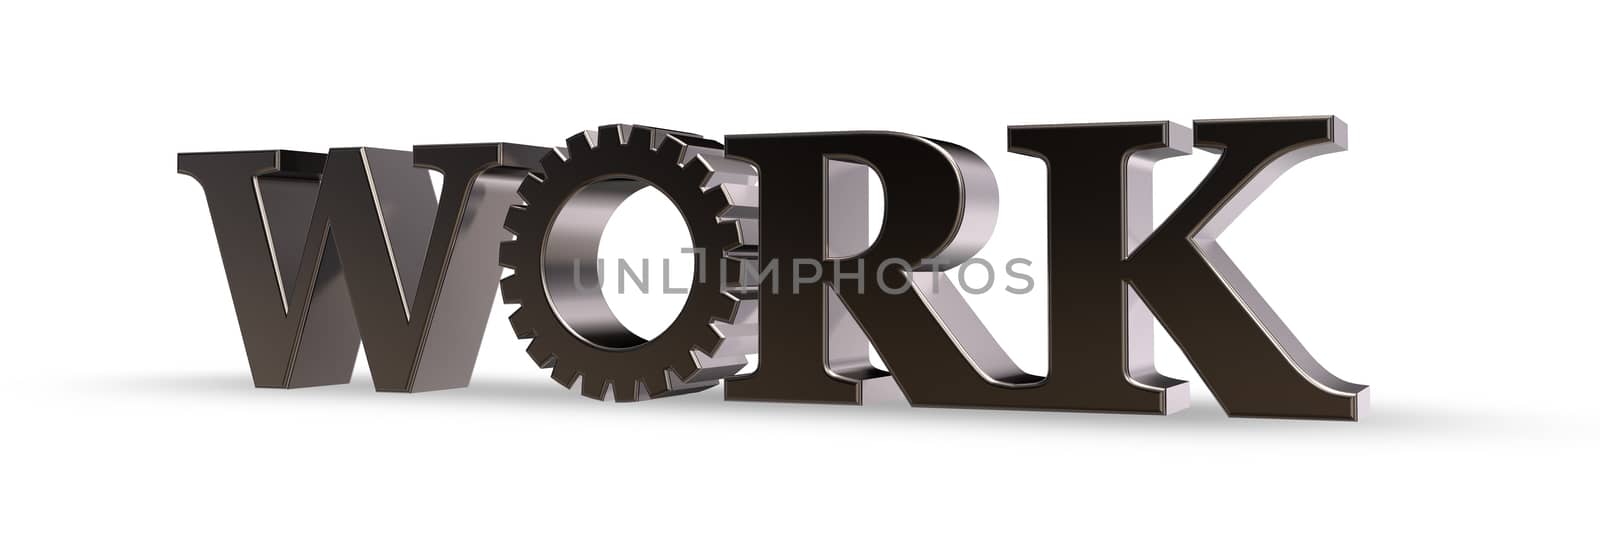 the word metal with gearwheel - 3d illustration